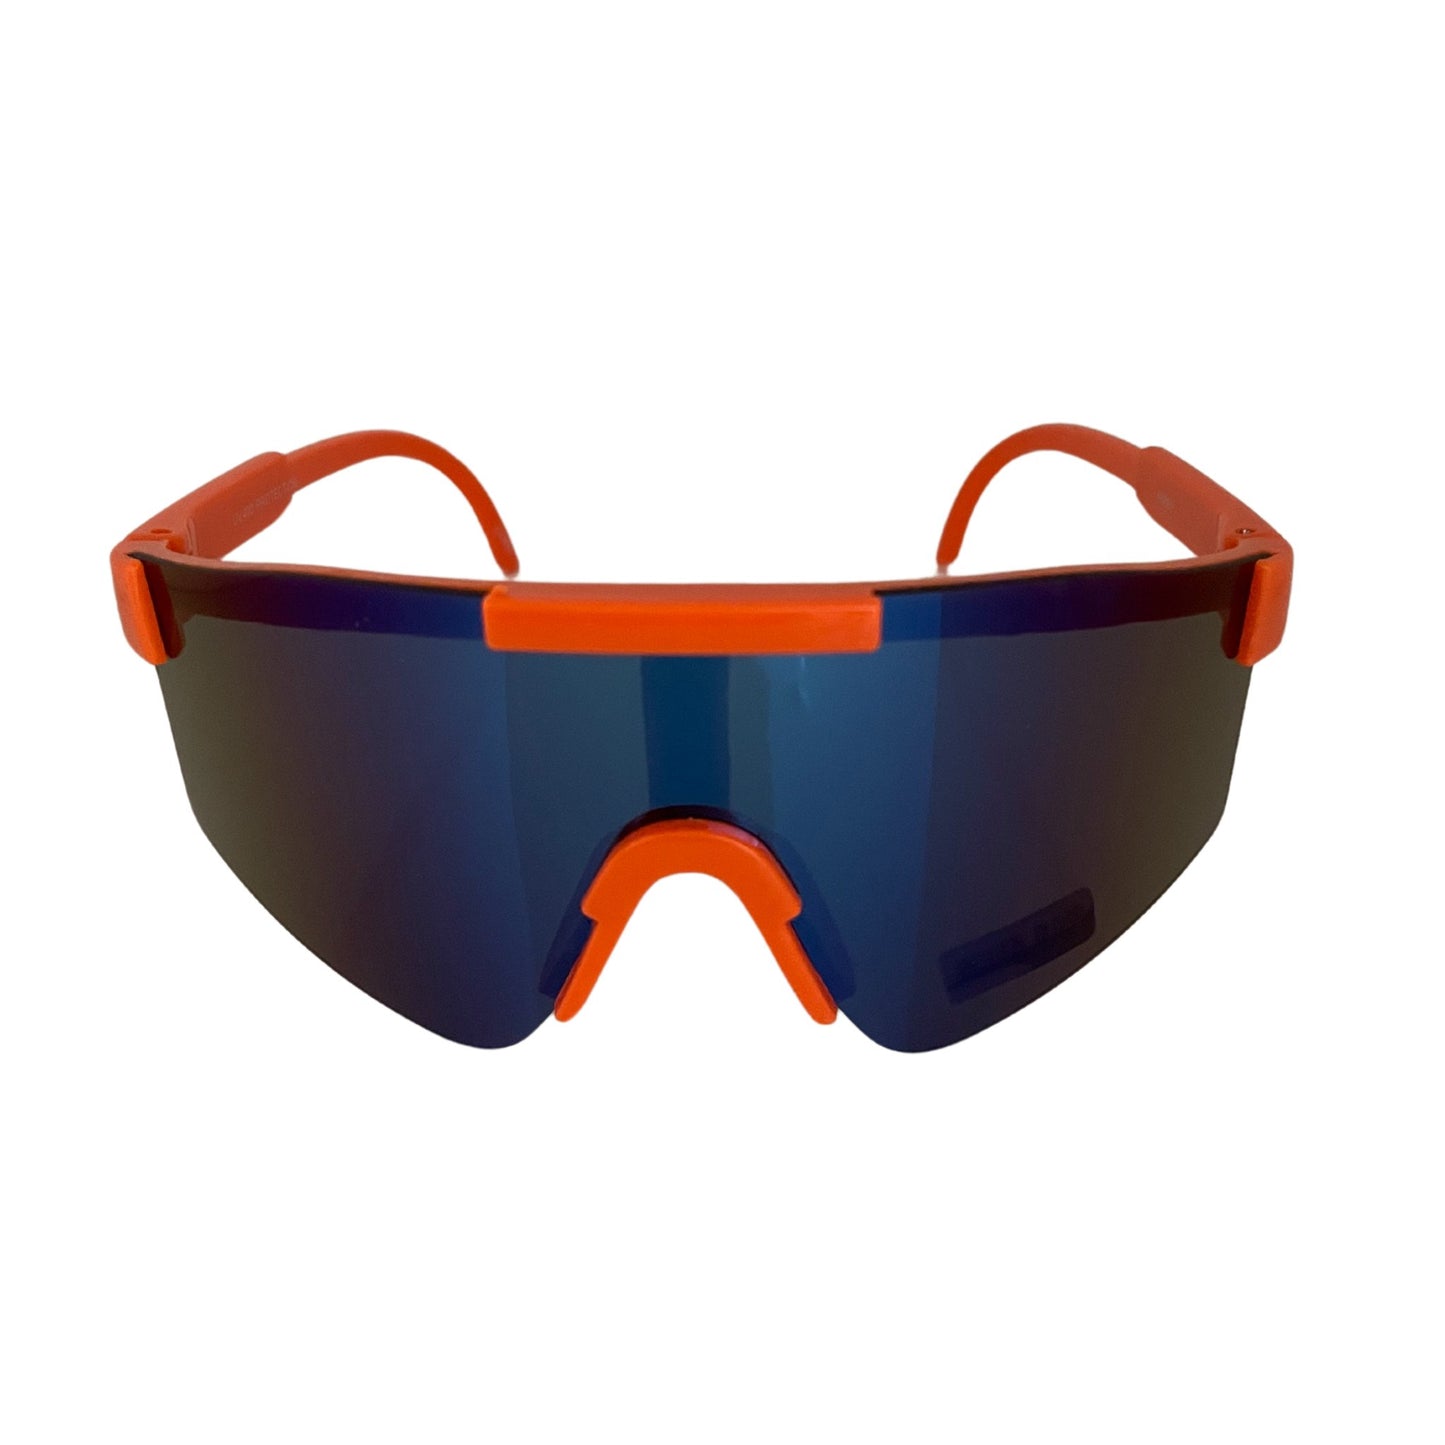 Kids Bright Polycarbonate Shield Sunglasses - What's the 4-1-1